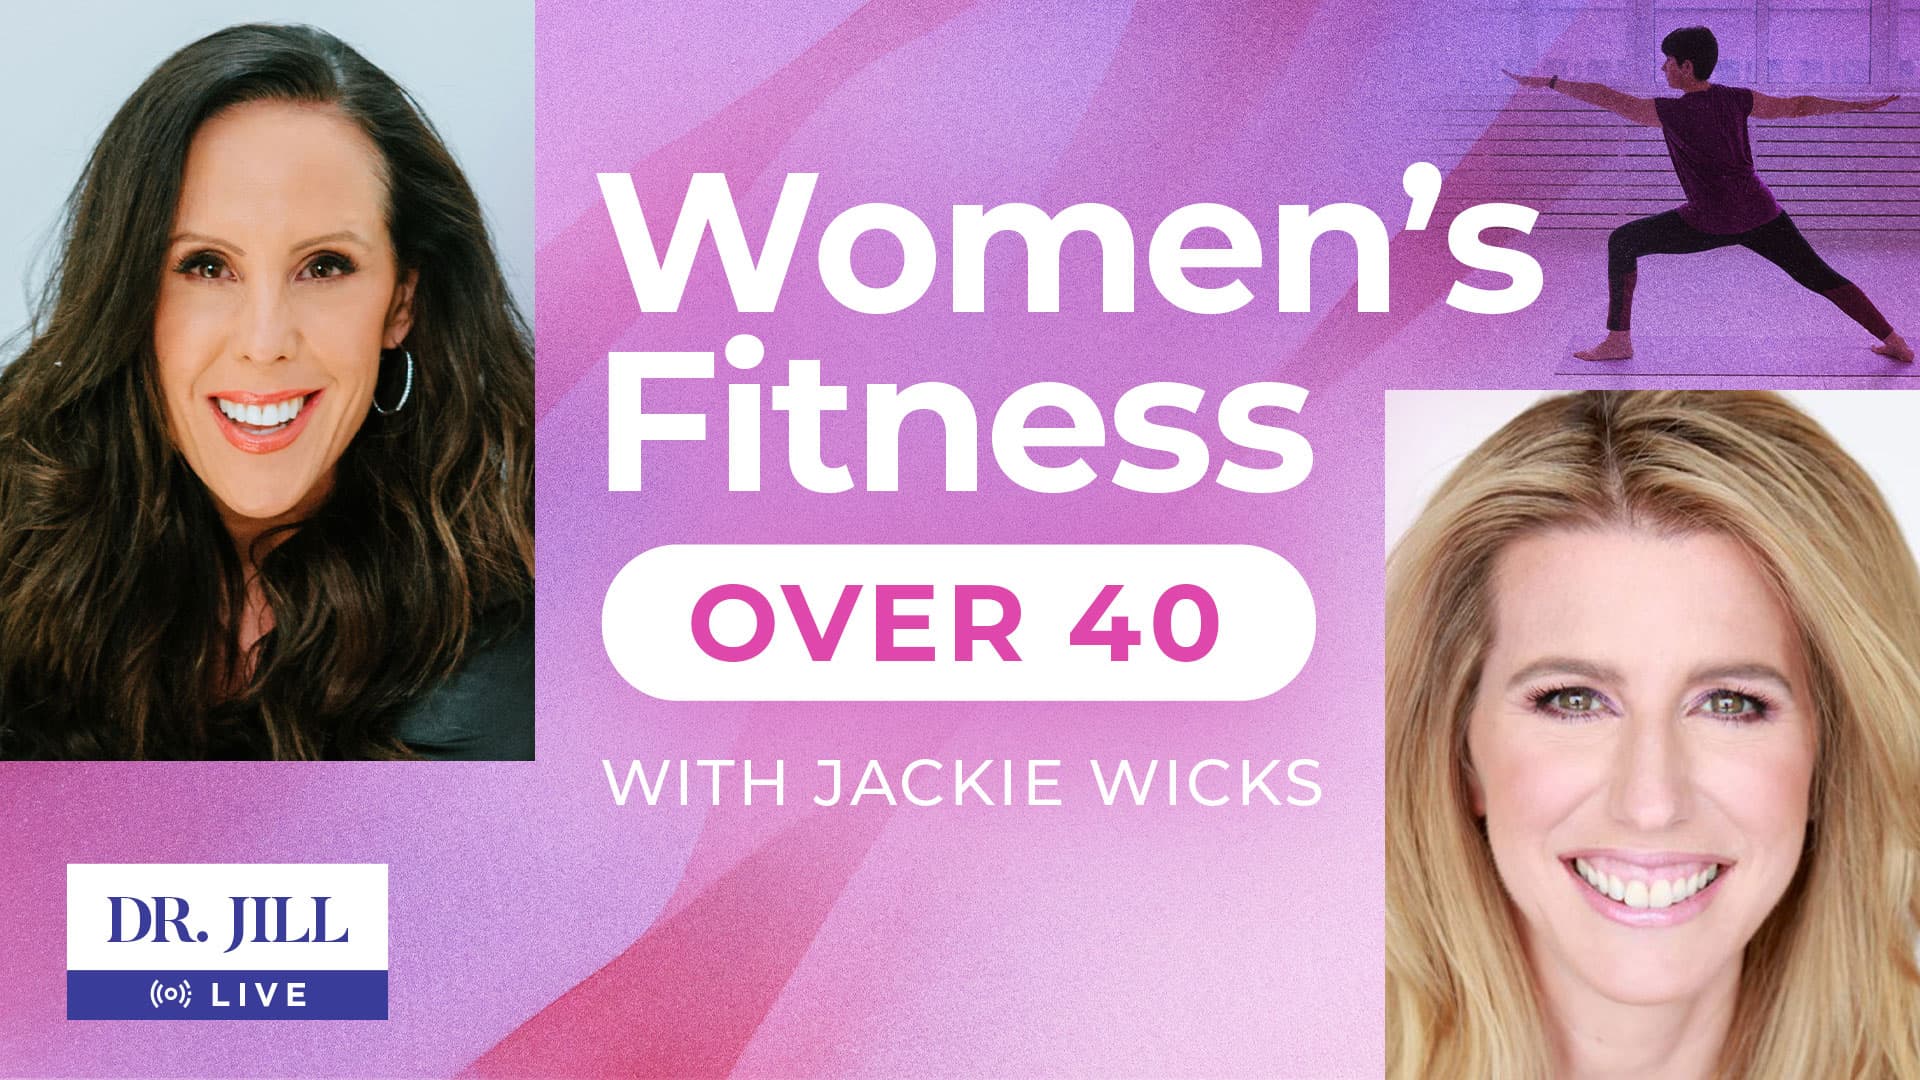 17: Dr. Jill Interviews Jackie Wicks About Women’s Fitness Over 40